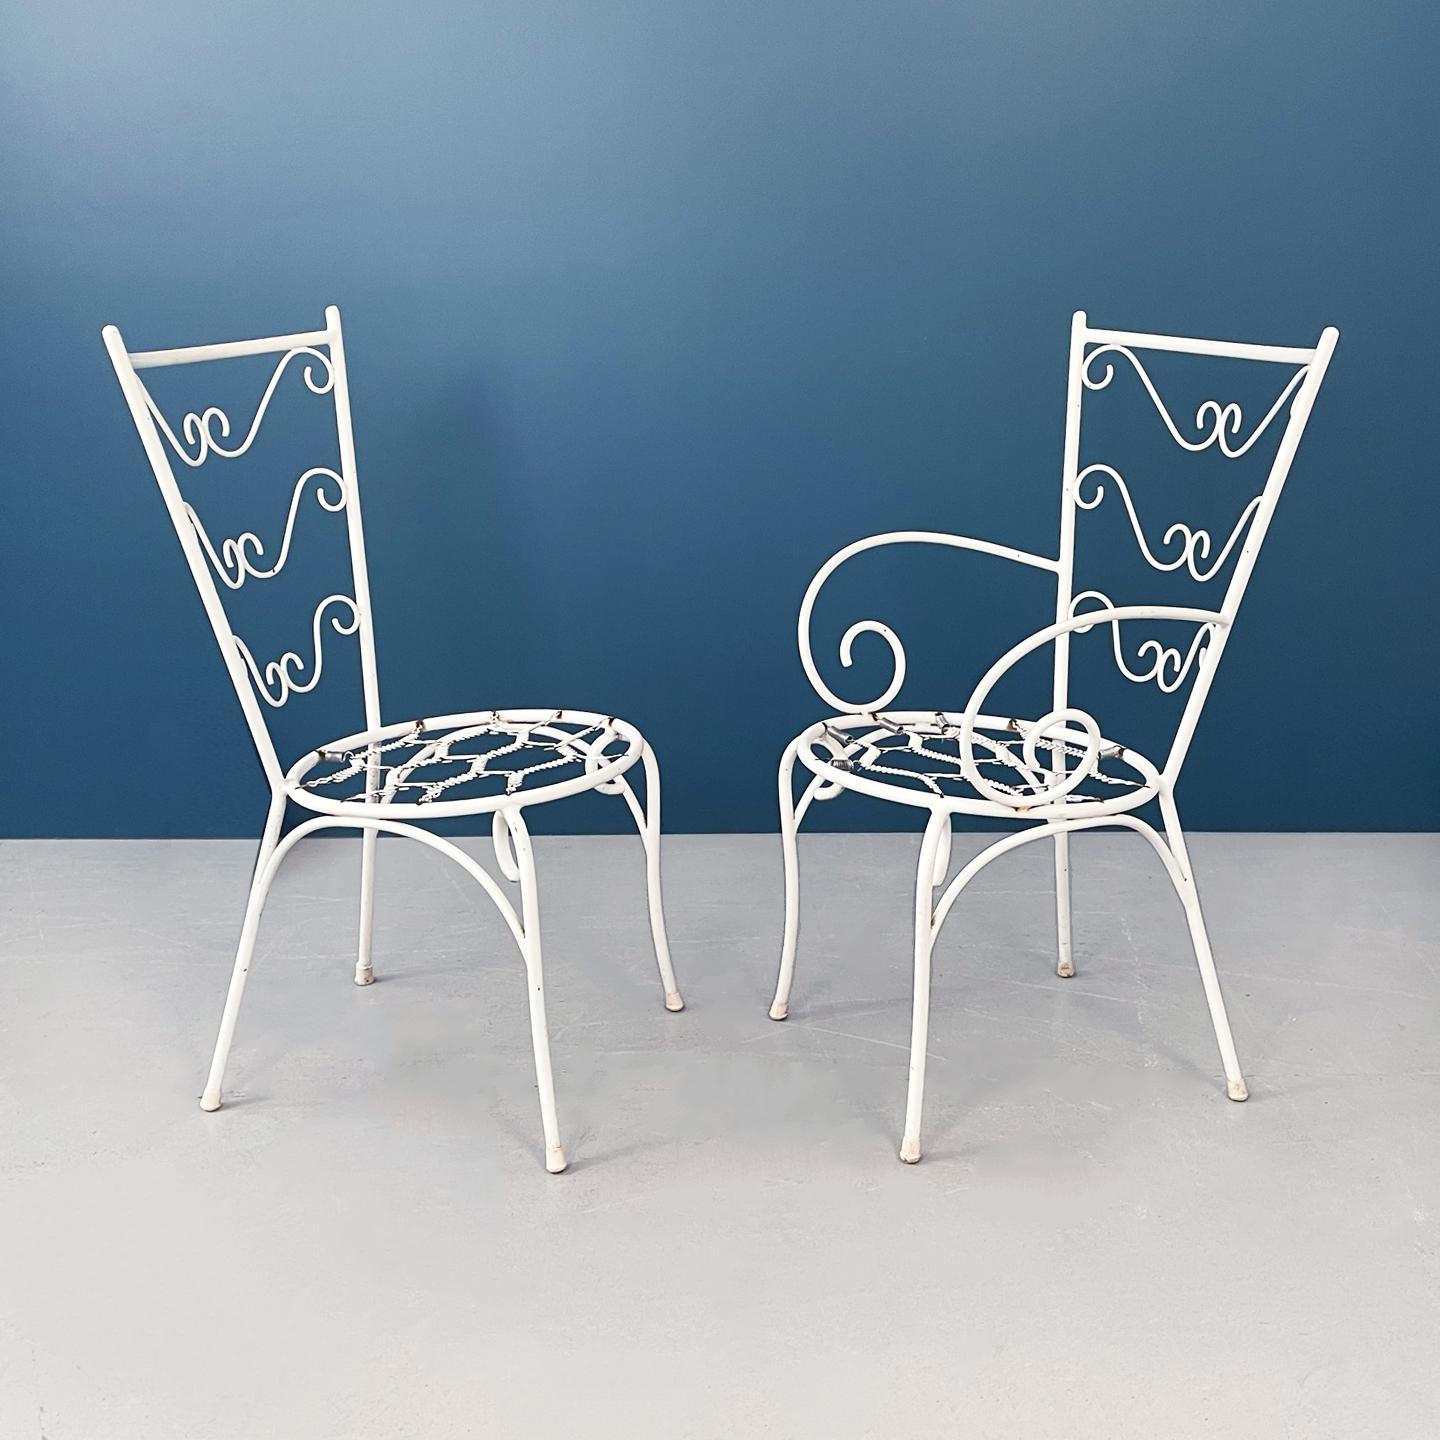 Italian mid-century Garden chairs in white wrought iron and fabric, 1960s.
Garden set consisting of 4 chairs. The outdoor chairs are in white painted wrought iron. The round seat is made up of a series of springs, on which is placed a padded